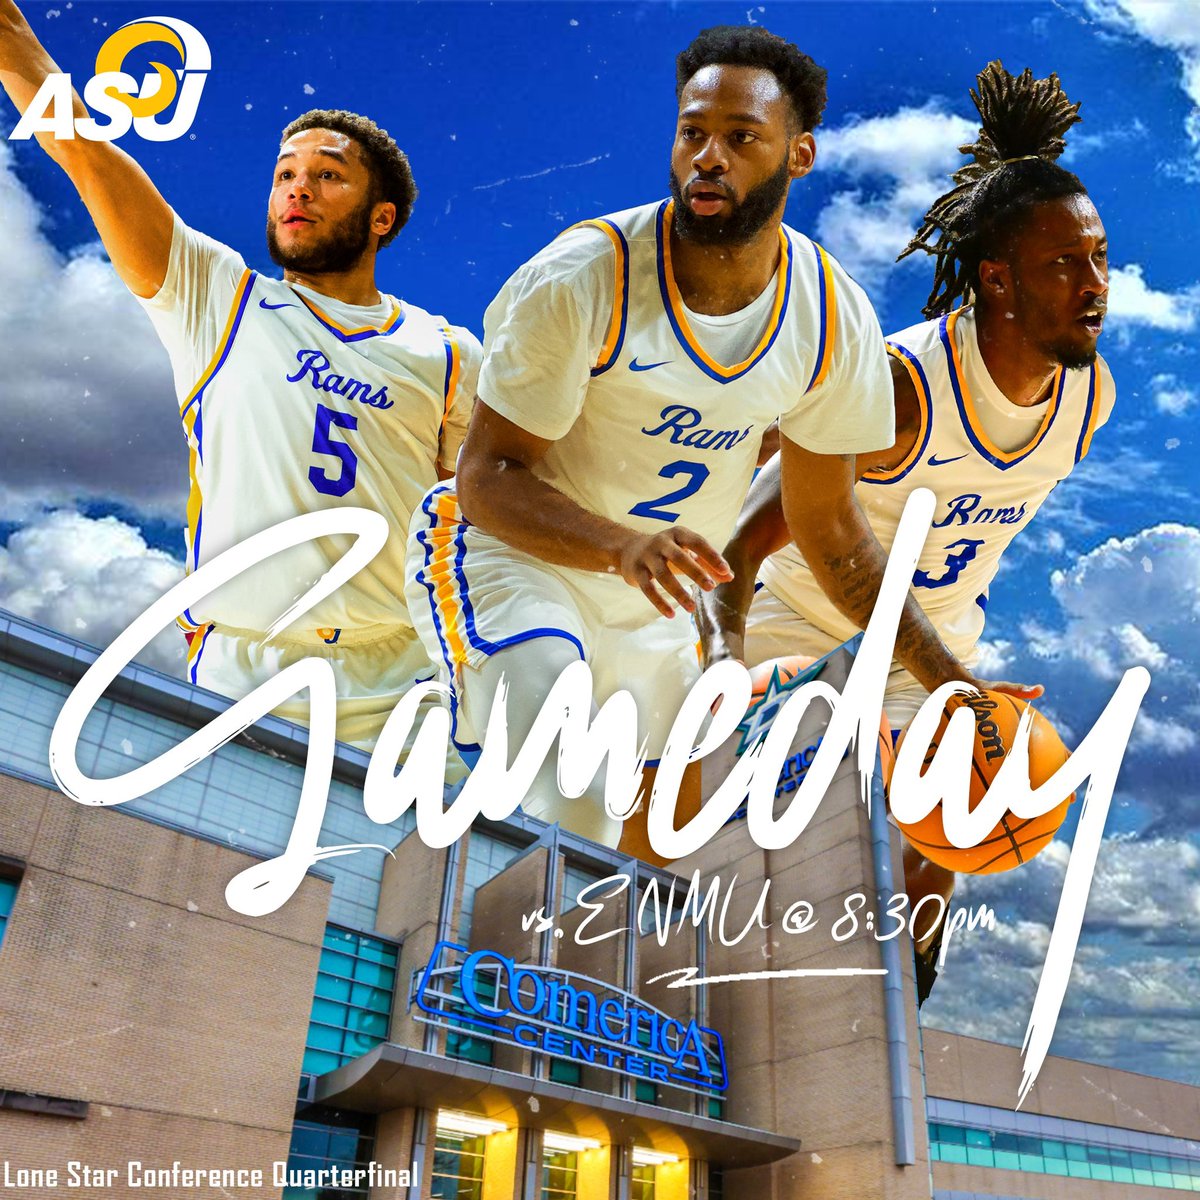 It’s 𝐆𝐀𝐌𝐄𝐃𝐀𝐘 in Frisco. Our first round matchup of the LSC conference tournament starts at 8:30pm! #RamHoops | #RamFam